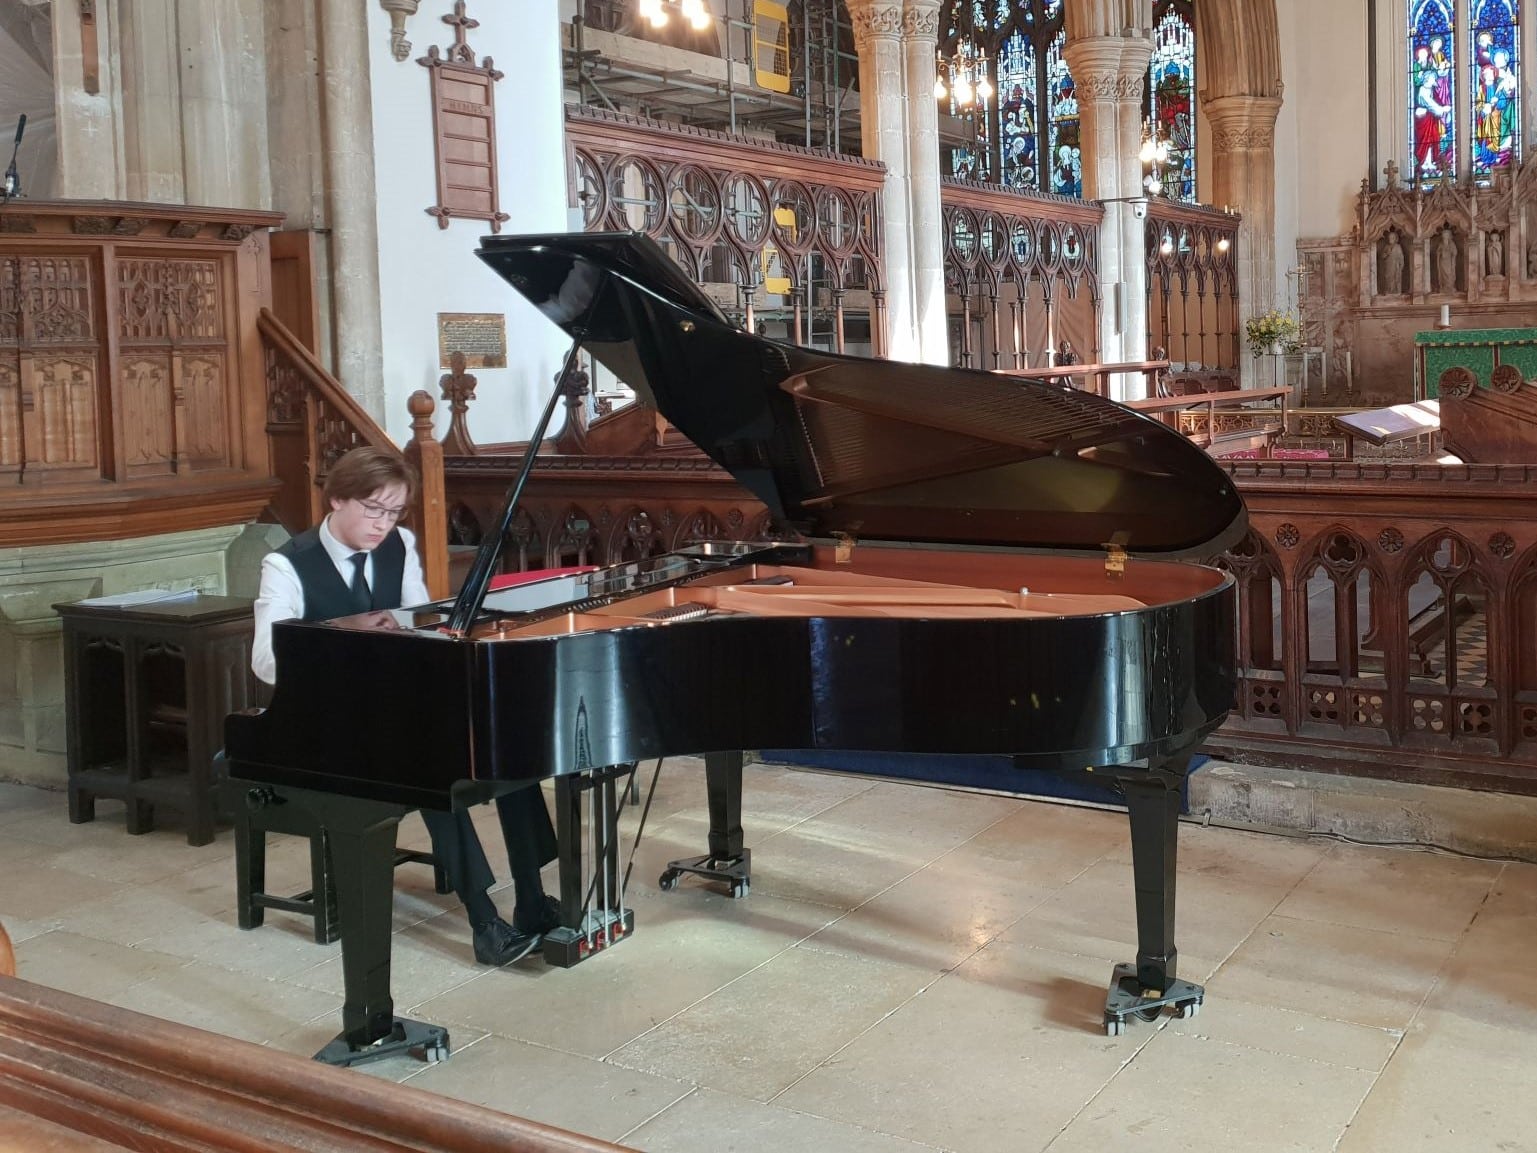 Student gives piano recital in a church